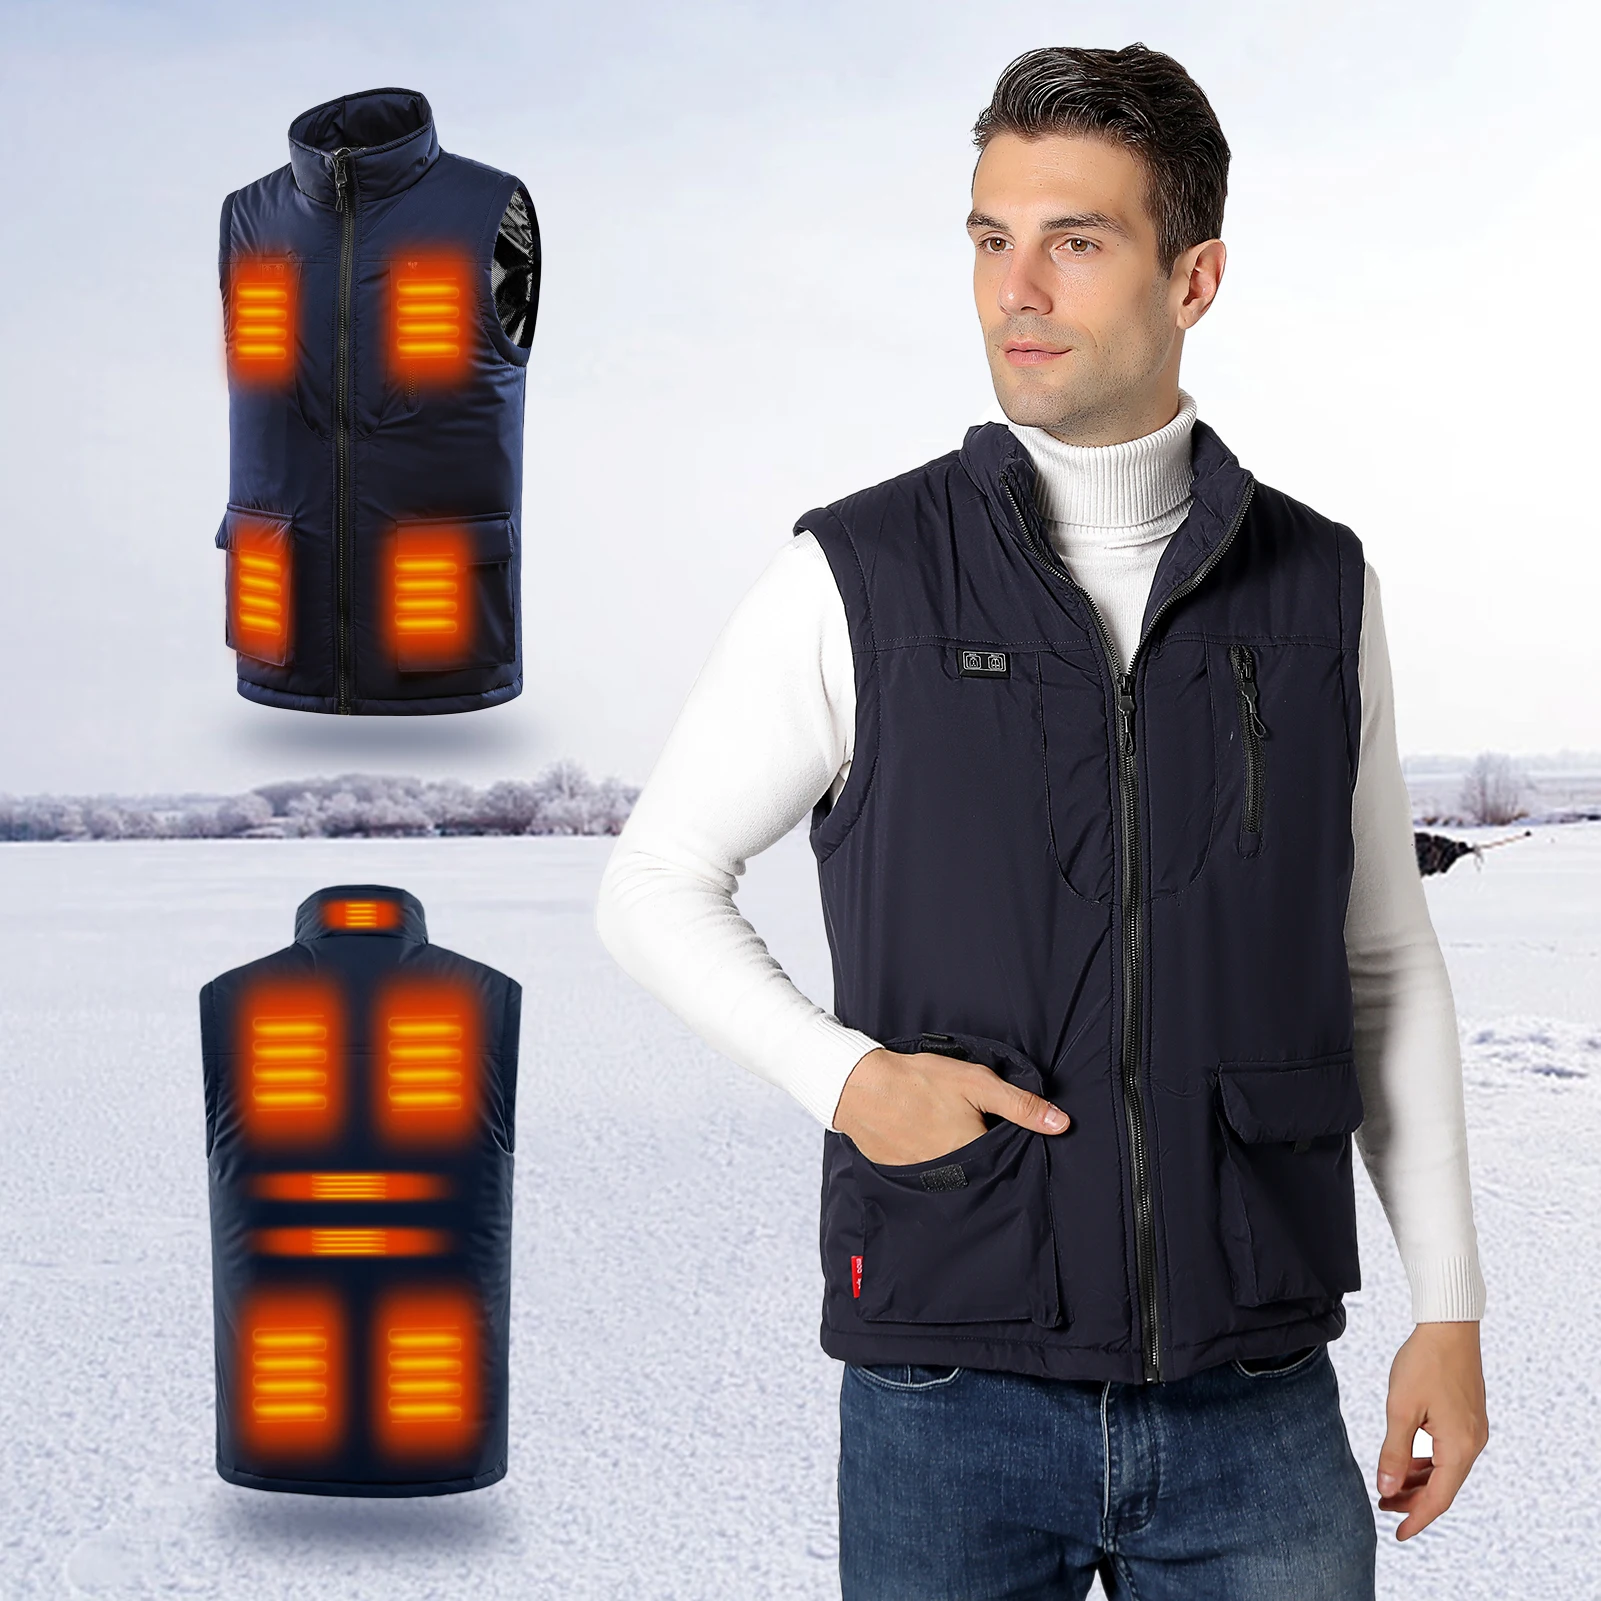 

11 Areas Heated Vest for Men Women Thermal Vest Outdoor Winter Warm Electric Heating Vest Skiing Jacket Heated Clothing